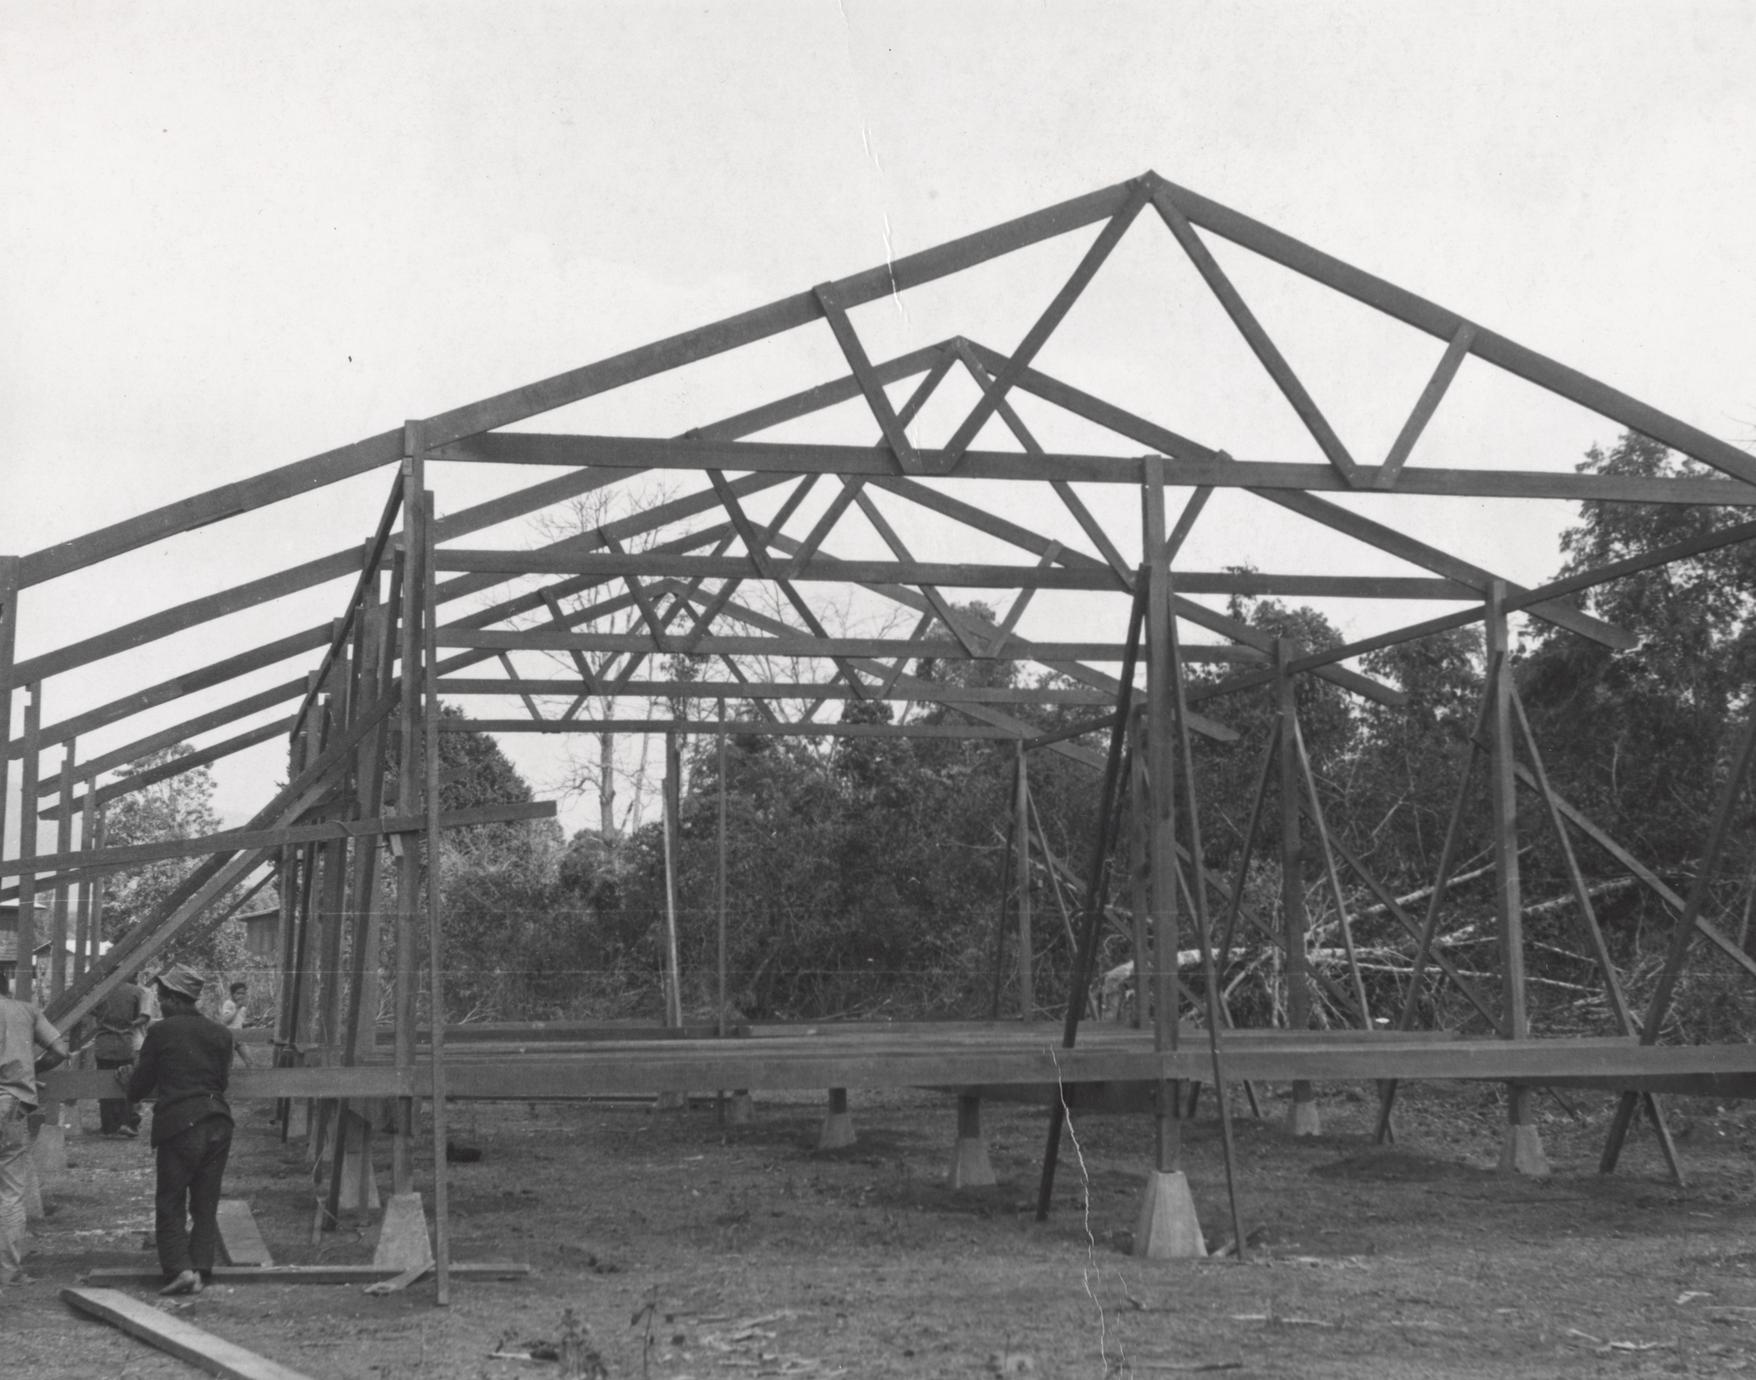 Construction of the school at the village of Nong E-oi, Houei Kong Cluster in Attapu Province